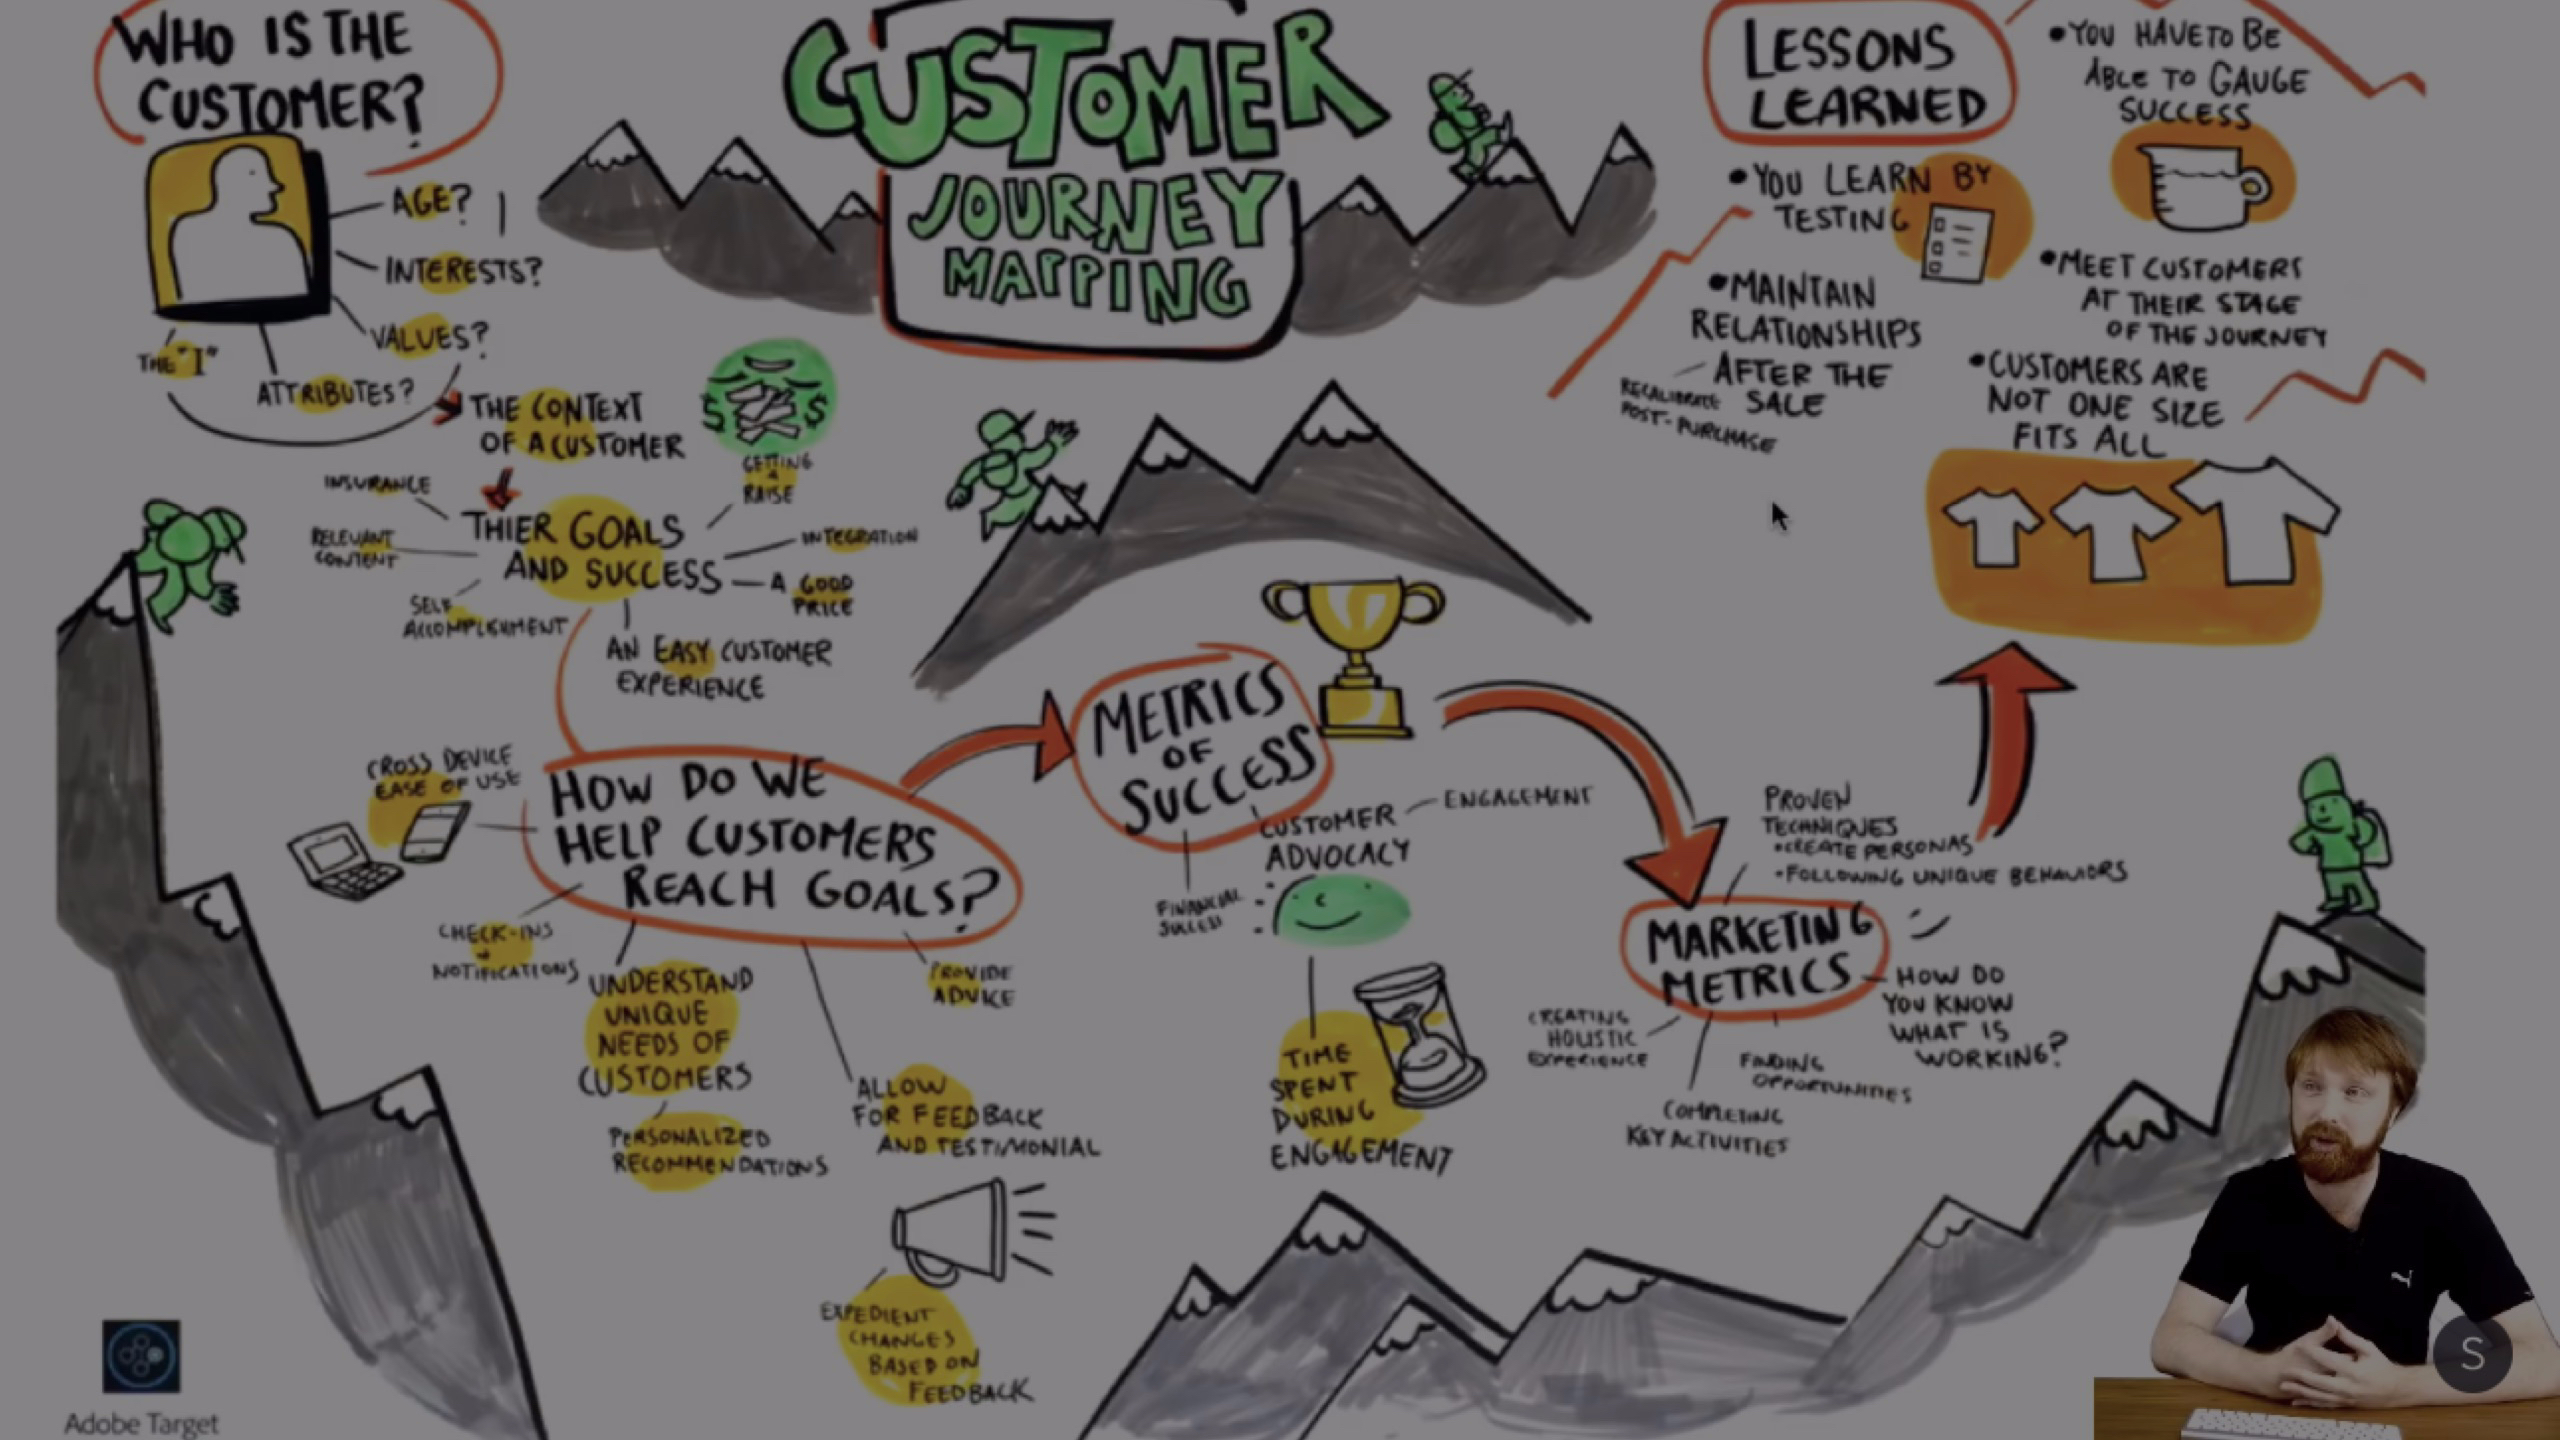 How to build a Customer Journey Map